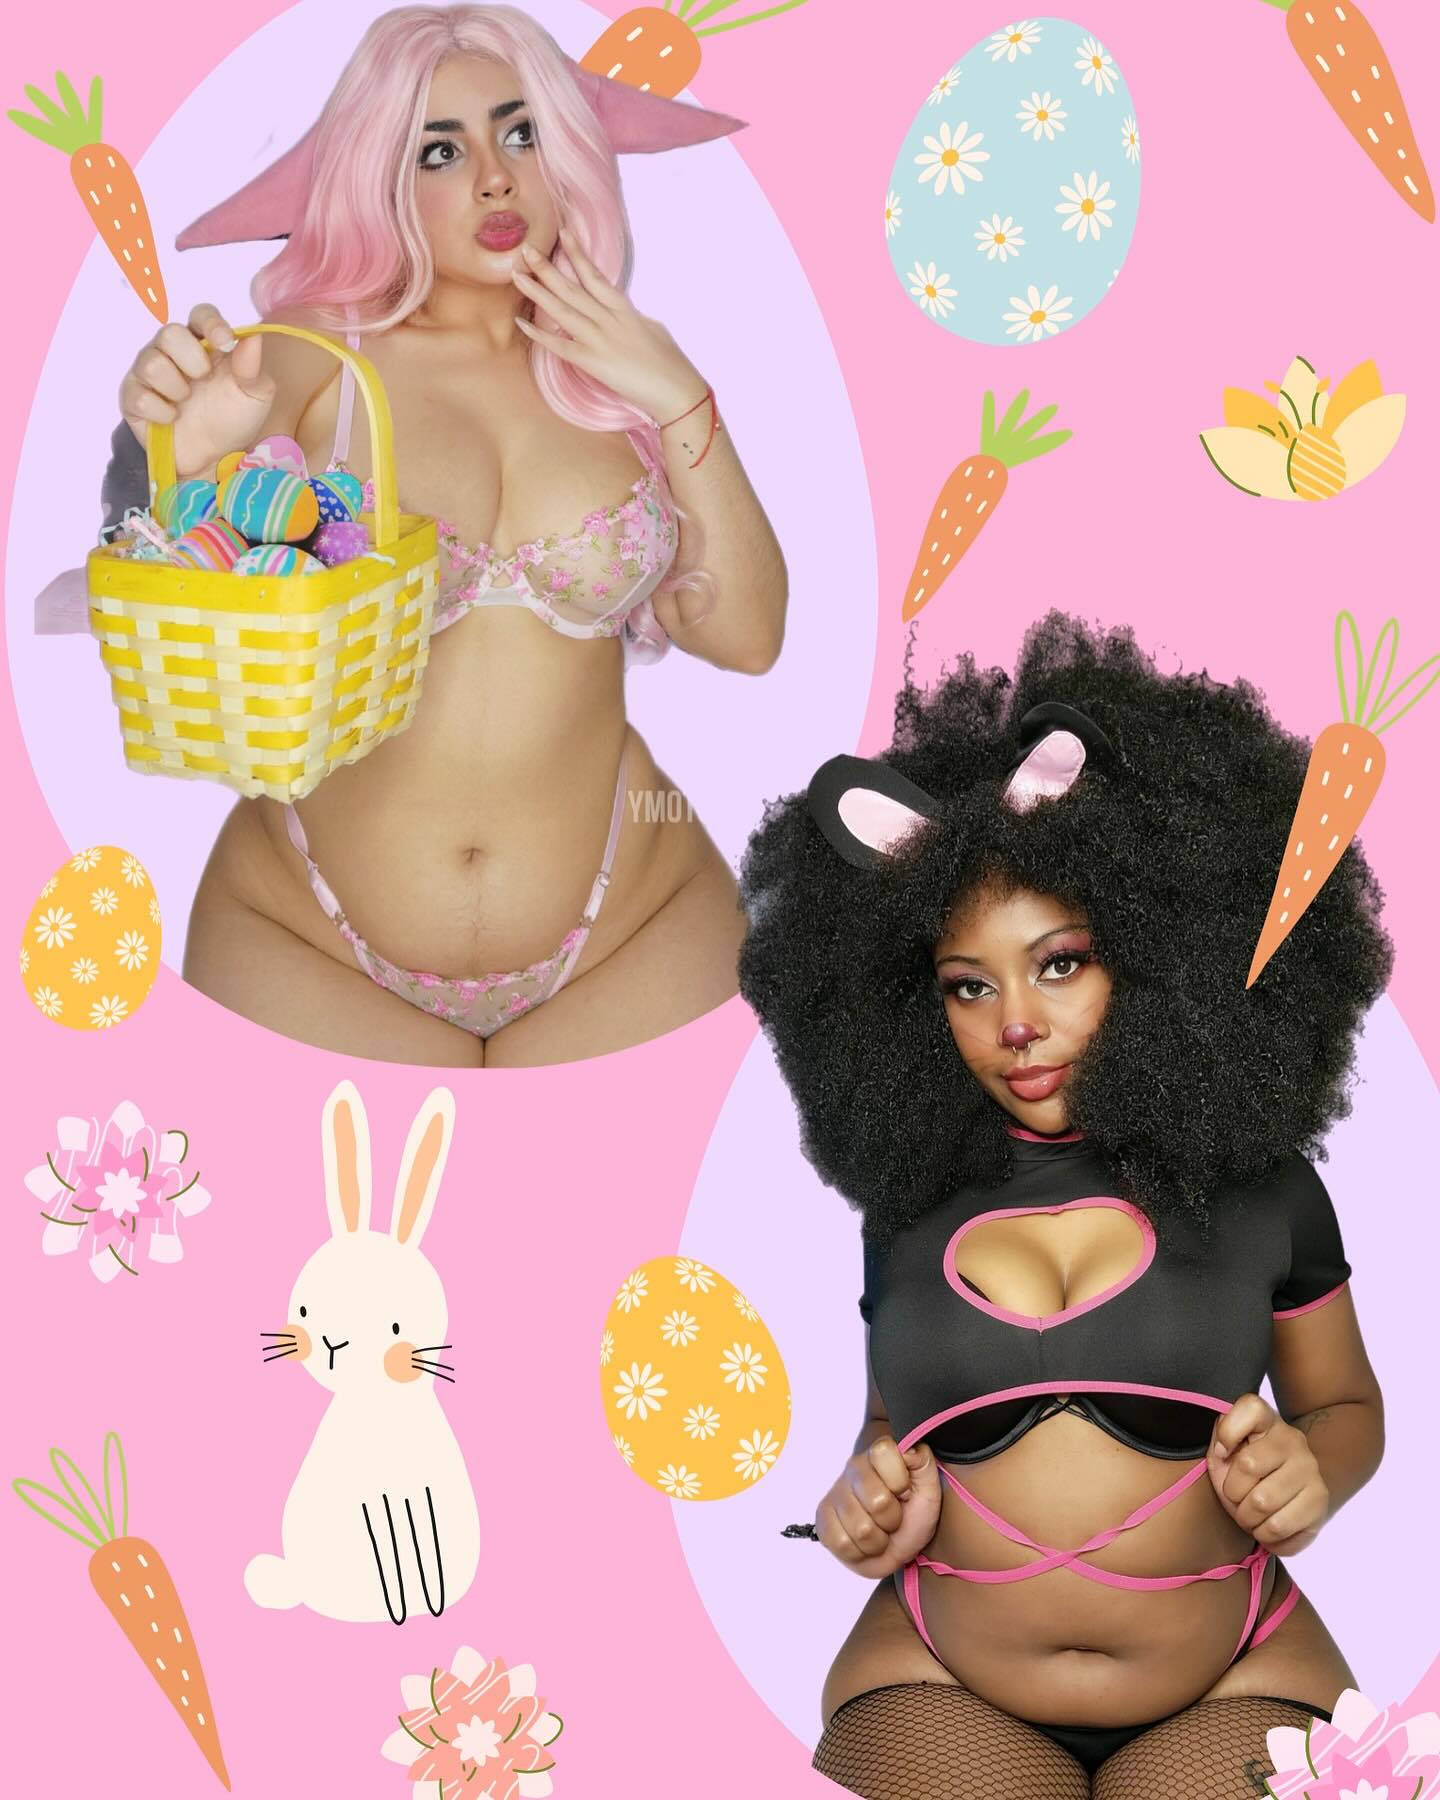 🐇💕🐰 It’s bunny season!!! 🐰💕🐇
Really excited to share this Easter bunny collab with everyone. 😍 The theme was COLORS 🎨 🌈 Hope you enjoy this as much as we did while creating it! Be sure to swipe through to see everyone’s beautiful bunnies!!! 🐰
.
🤍💙 Only a few of my pics are shared here. Be sure to join my 🍮 site for the full photoset plus videos! 💙🤍
.
📸 Photographer for my photos: @metalhoos
.
🐰 All the models:
@city.alien
@pearlpeony
@cucumbercosplay
@sheythegayy
@c_ntamination
@charanneloves
@ichinosekotomy
@carool.moonpr
___________________
#bunnygirl #bunnygirlcosplay #bunnycostume #bunnycosplay #kawaii #moegirl #kawaiigirl #animegirl #cosplaygirls #cosplaygirl #cosplayersofinstagram #kemonomimi #usamimi